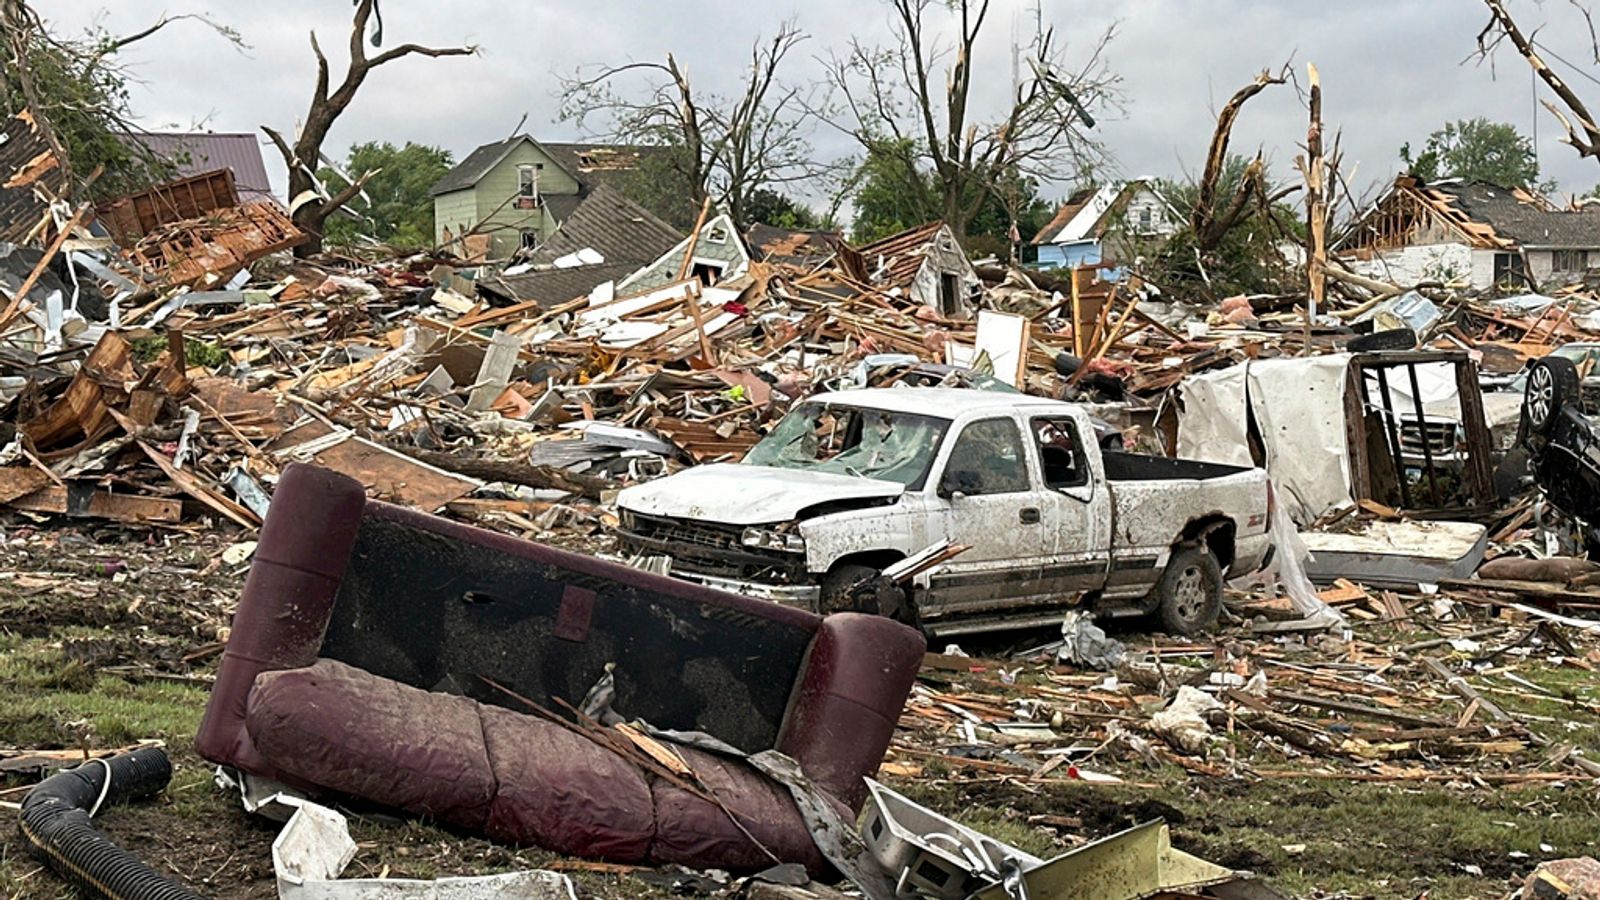 Iowa town flattened as tornadoes cause fatalities and devastation in US Midwest